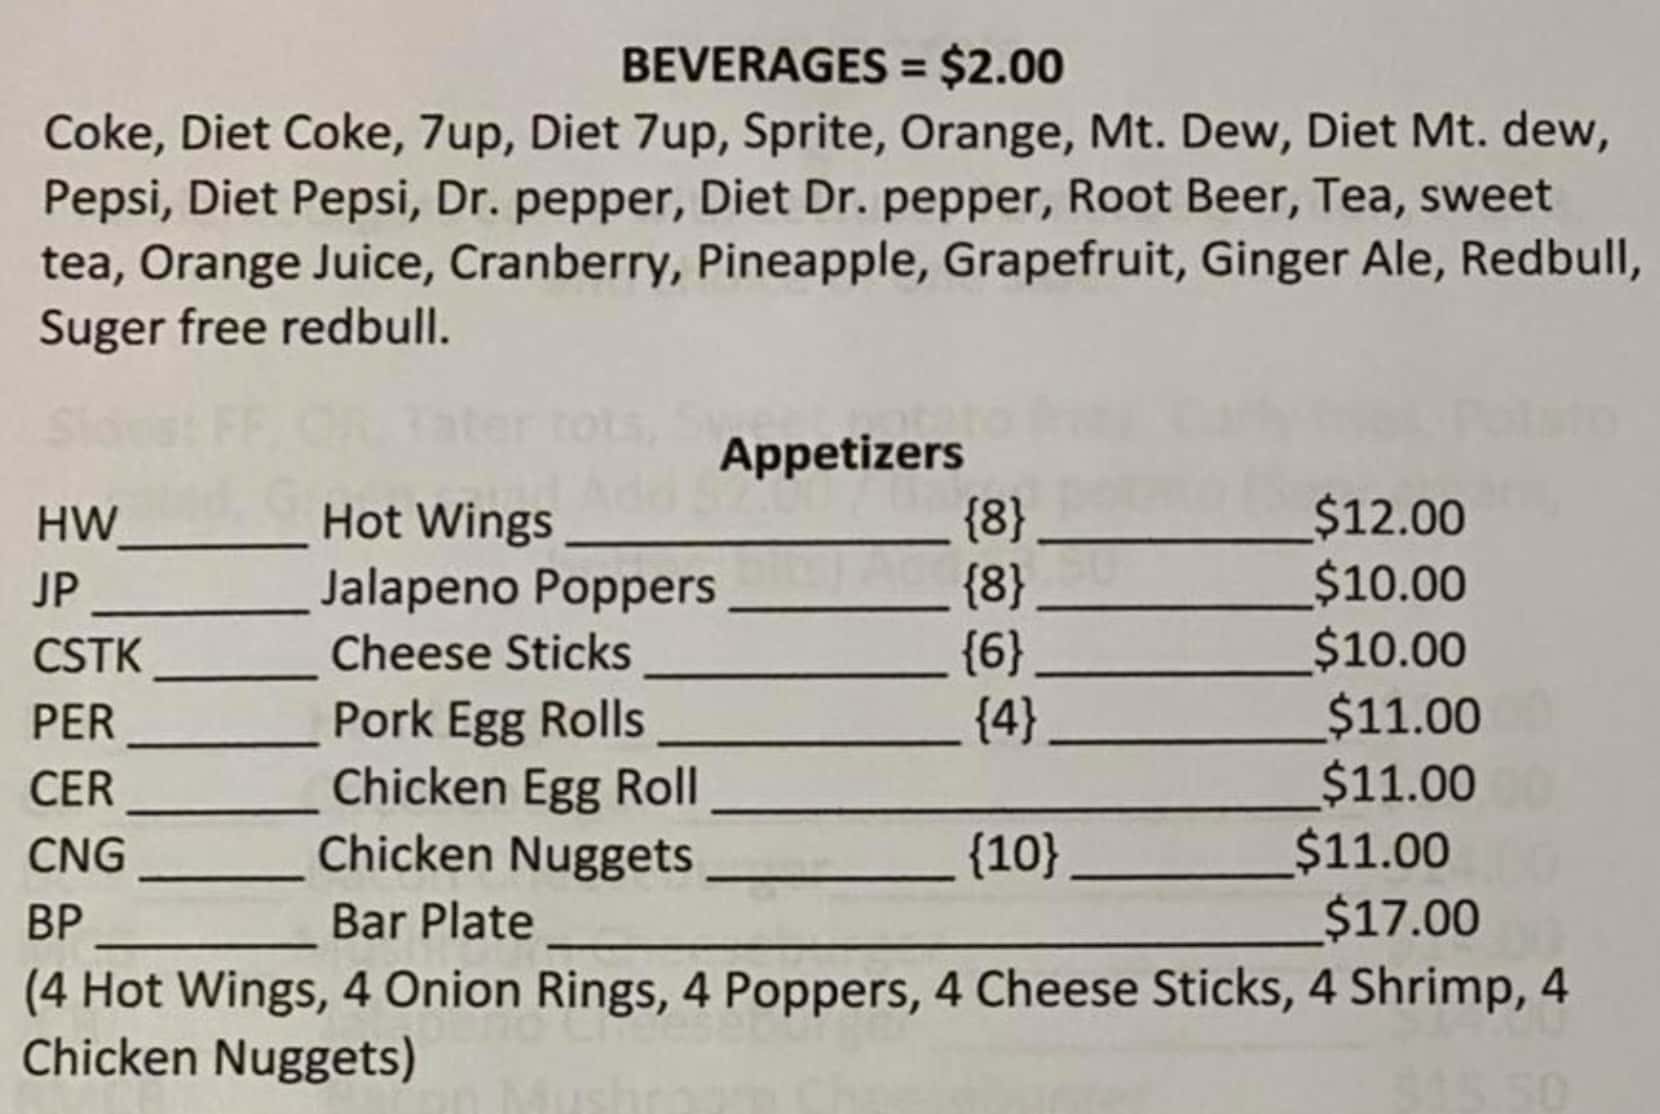 Silver Fox Inn Beverages and Appetizers Menu